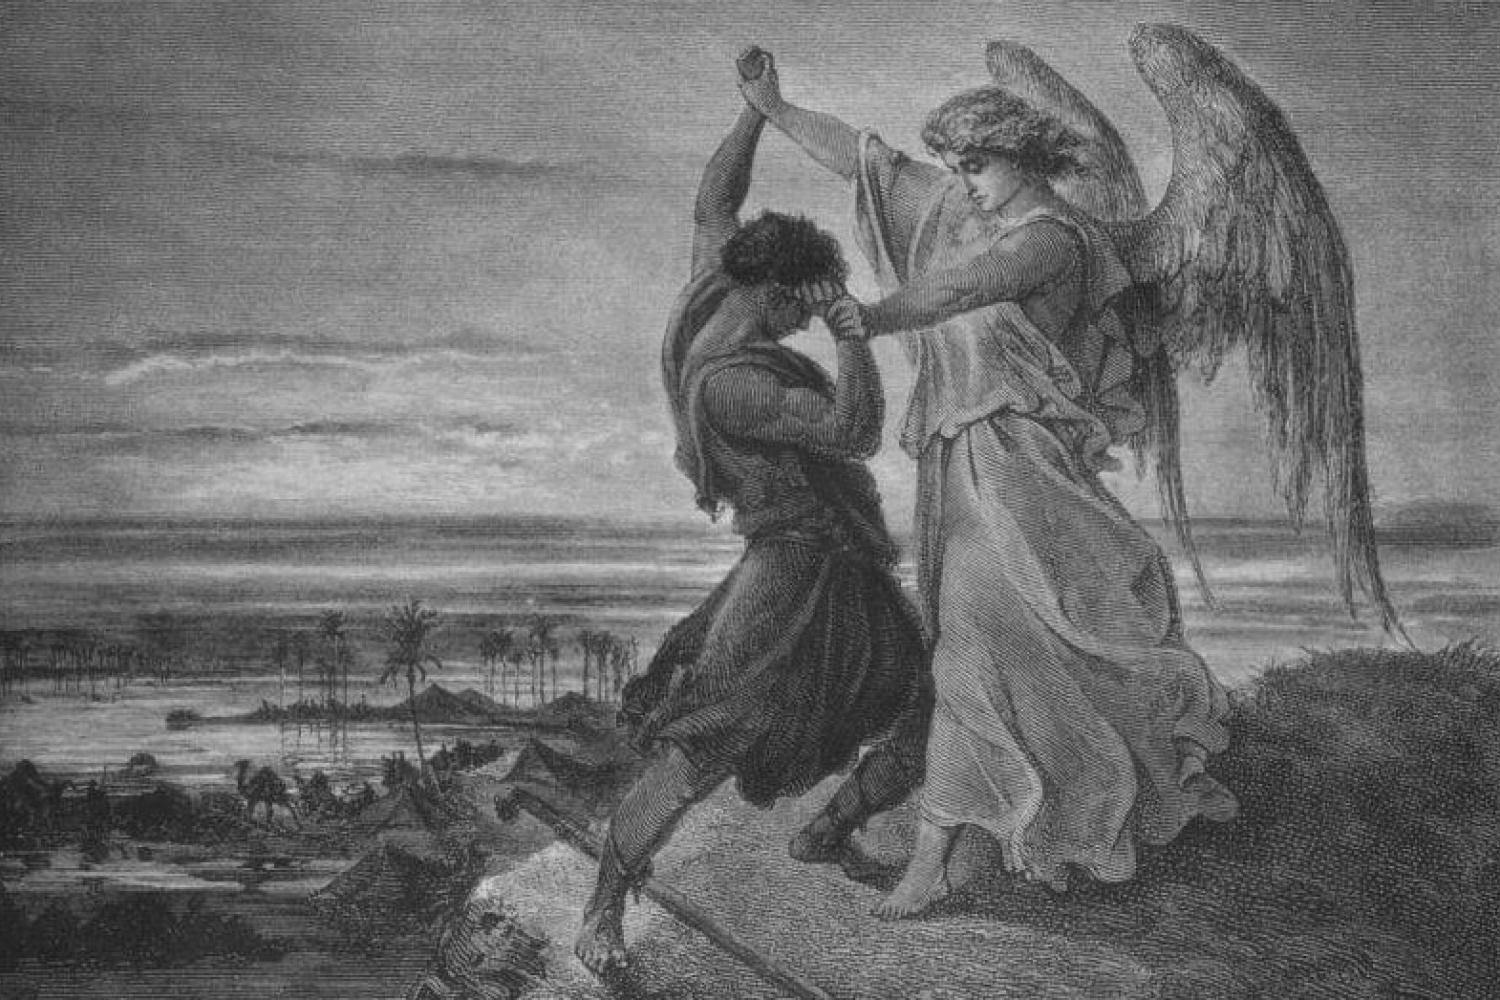 "Jacob Wrestles with the Angel," by Gustave Dore